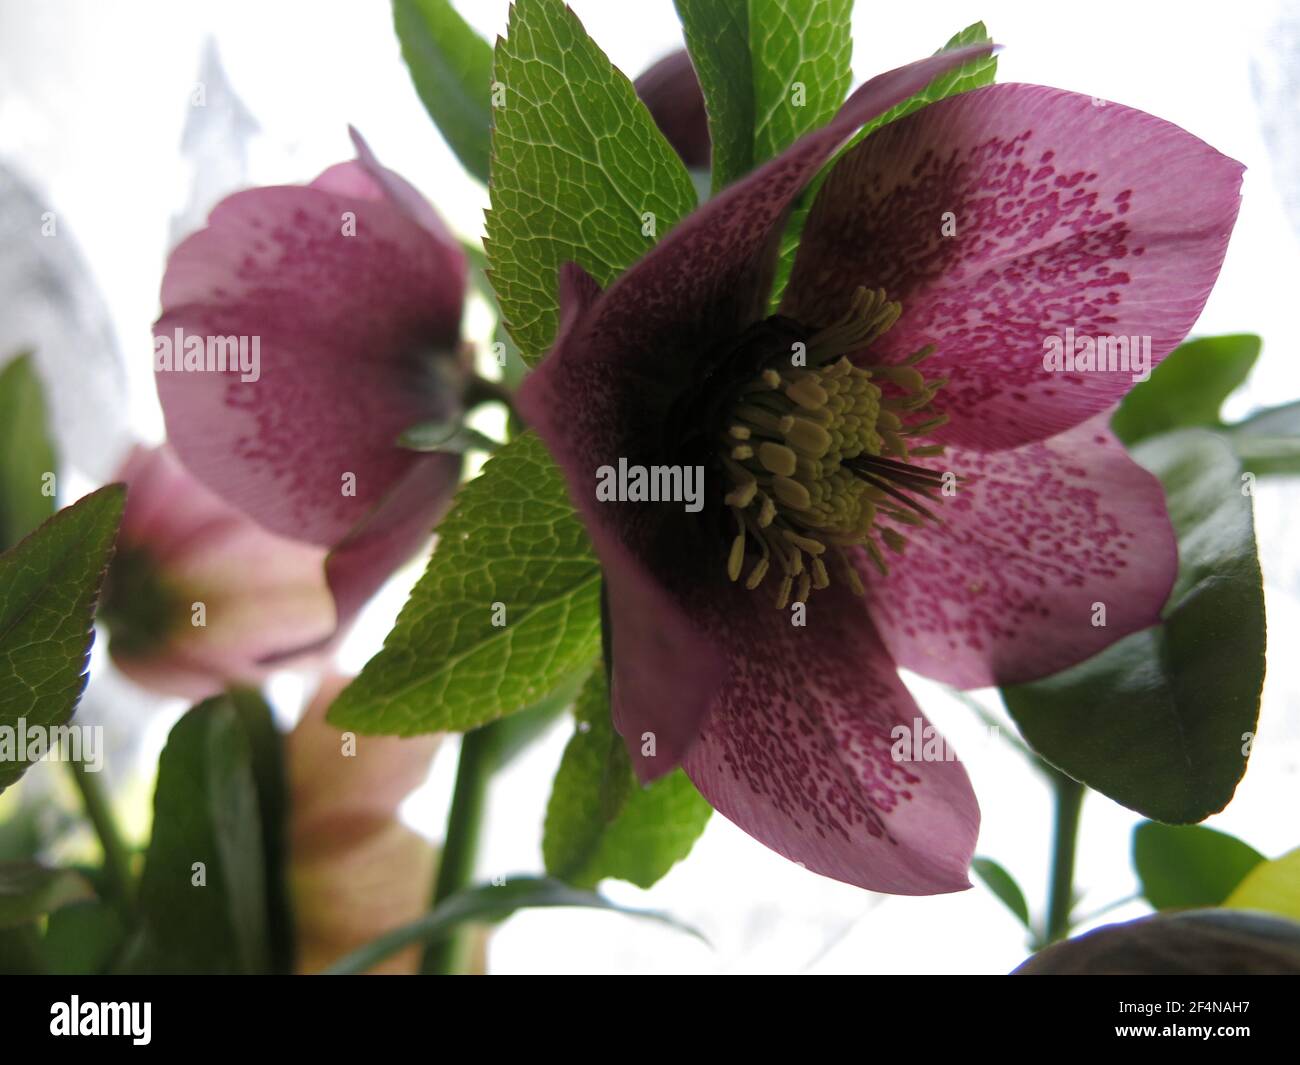 Botanical image with a close-up of the cup-shaped flower of a purple hellebore, backlit so the speckled pattern on the petals is clearly visible. Stock Photo